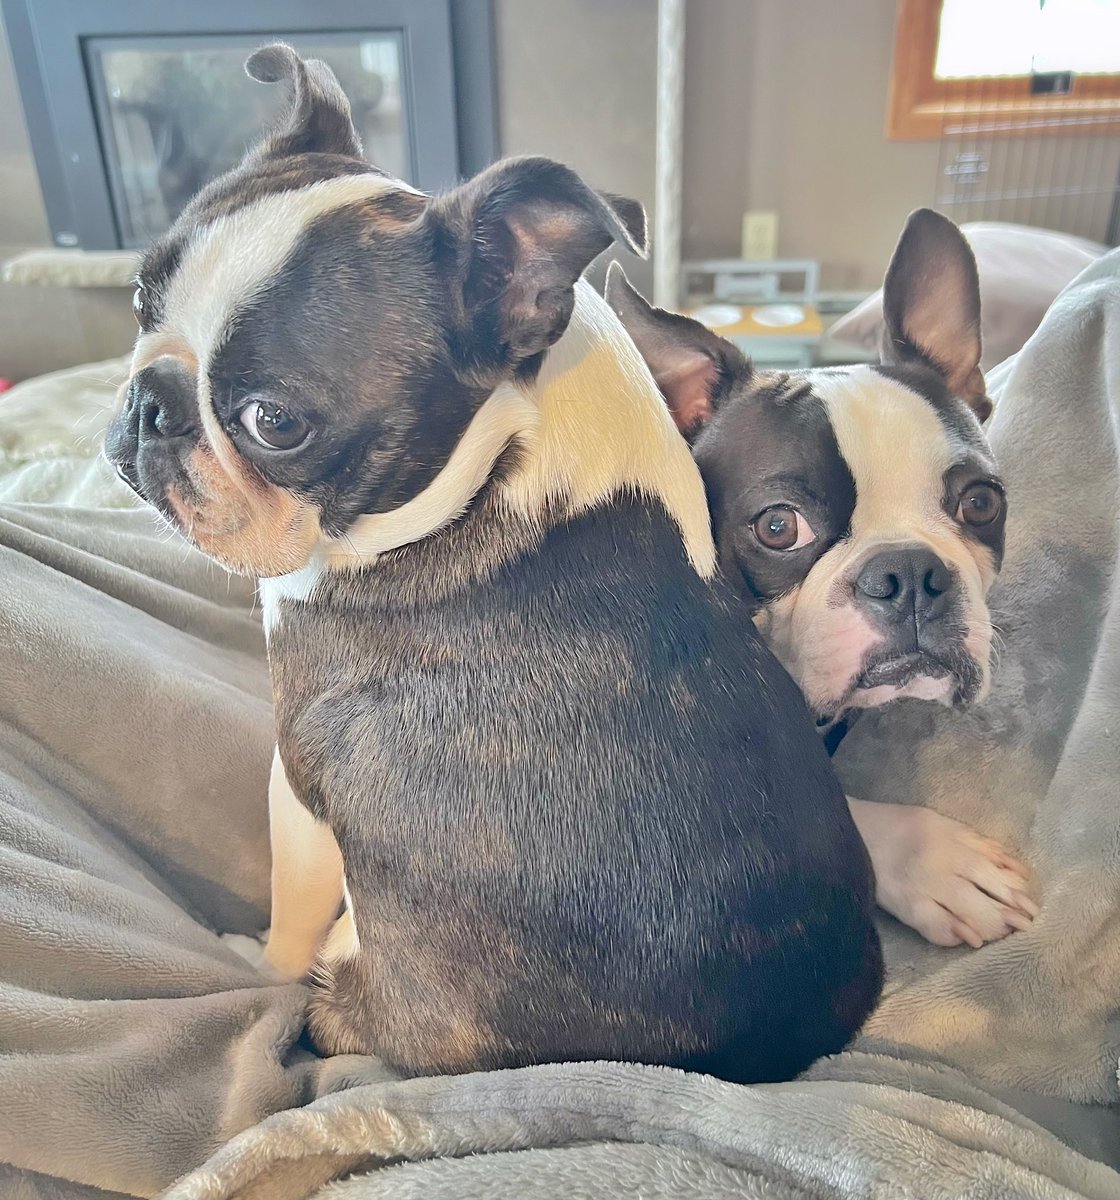 Little round bodies…expressive eyes…warm cuddles 
These are the things I’m thankful for 🫠
#doglover #dogsarethebest #bostonterrier #dogsoftwitter